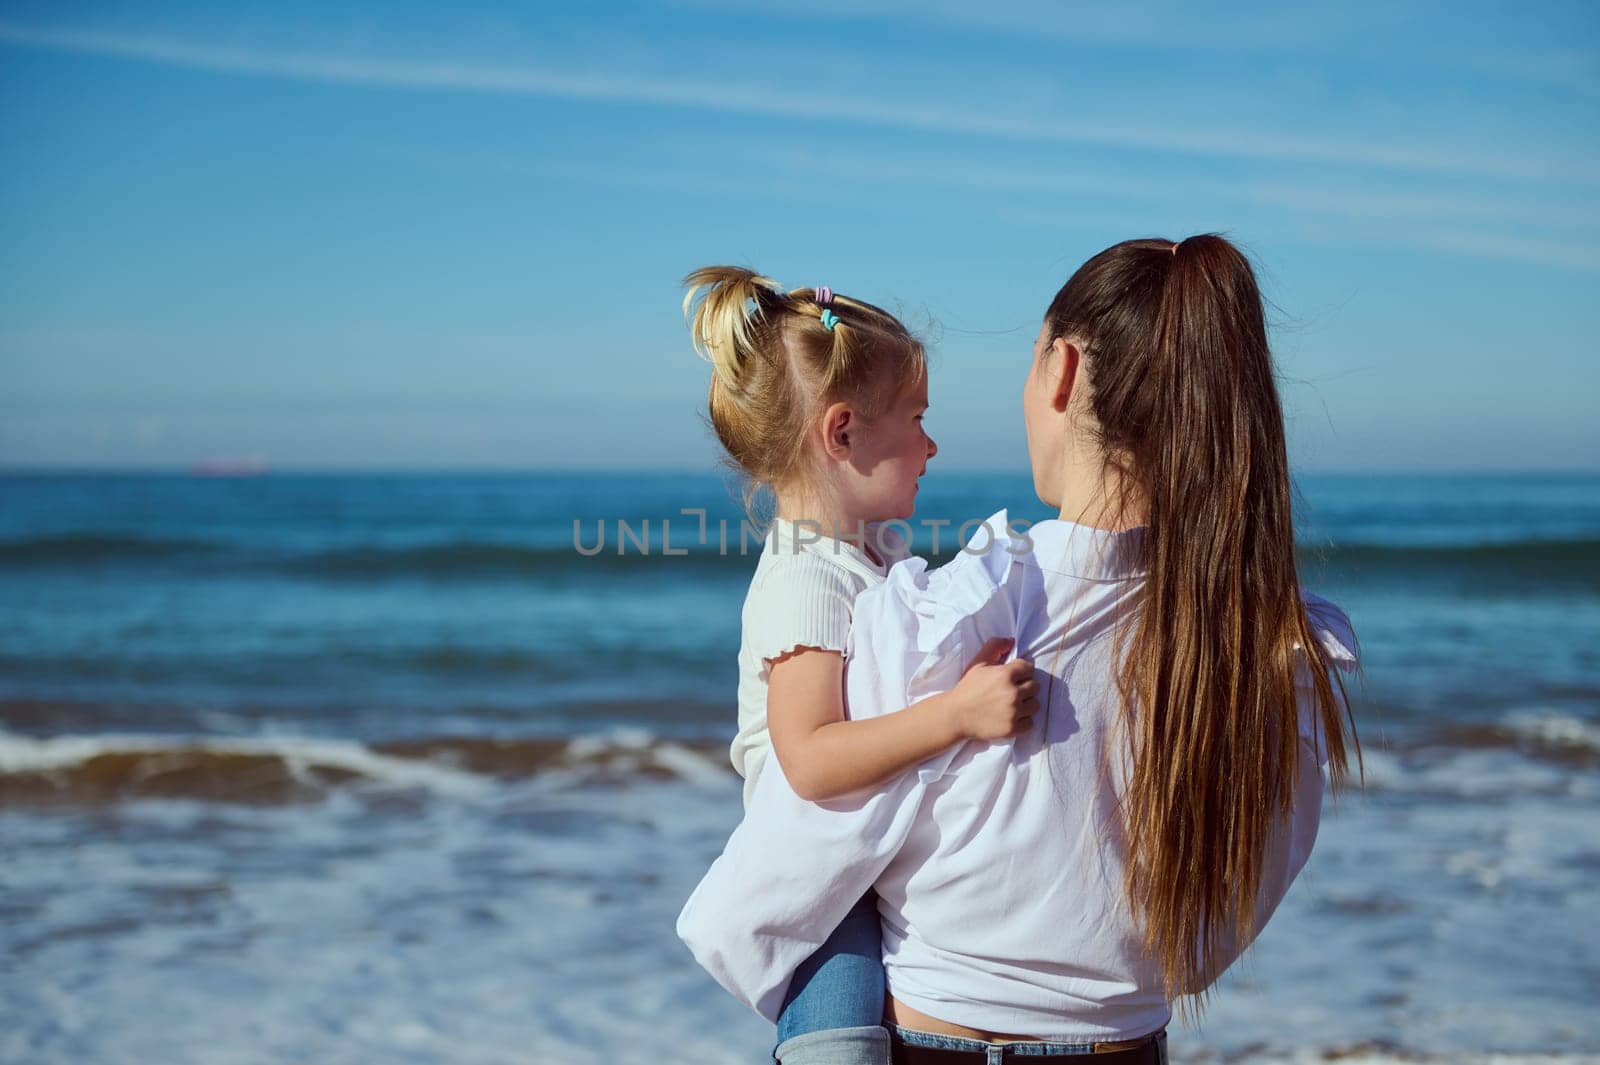 Rear view of a Caucasian mother holding her daughter on arms, standing together on the beach and admiring beautiful waves splashing while pounding on the sandy shore. People and nature. Family pastime